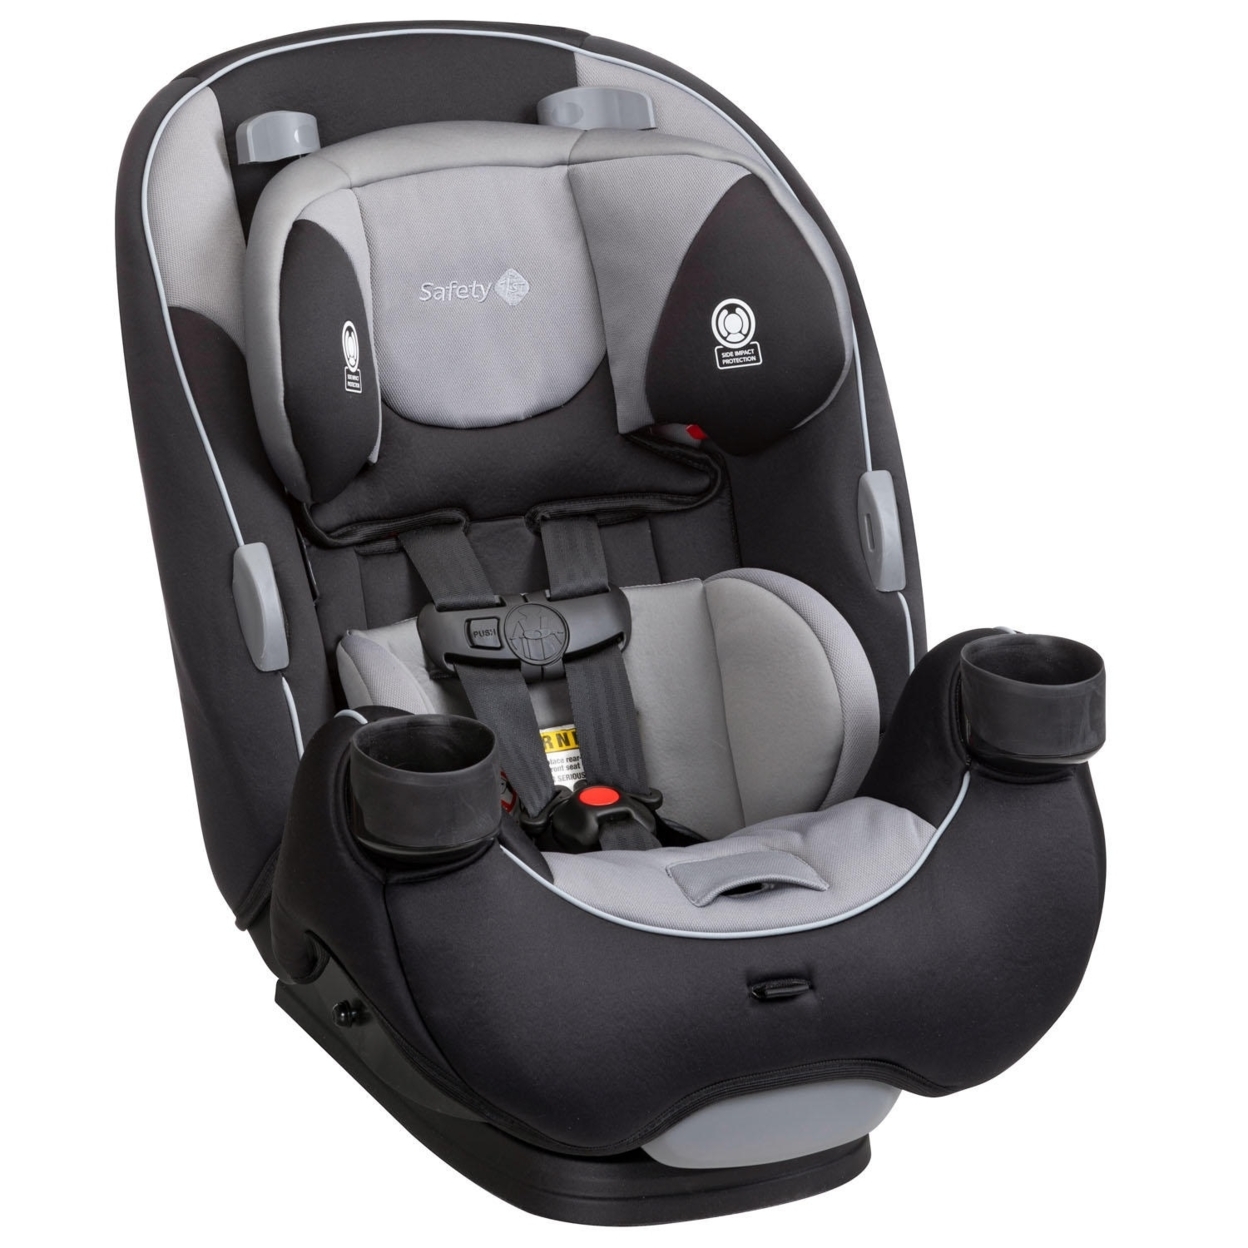 Safety 1st EverFit 3-in-1 Convertible Car Seat, Compass